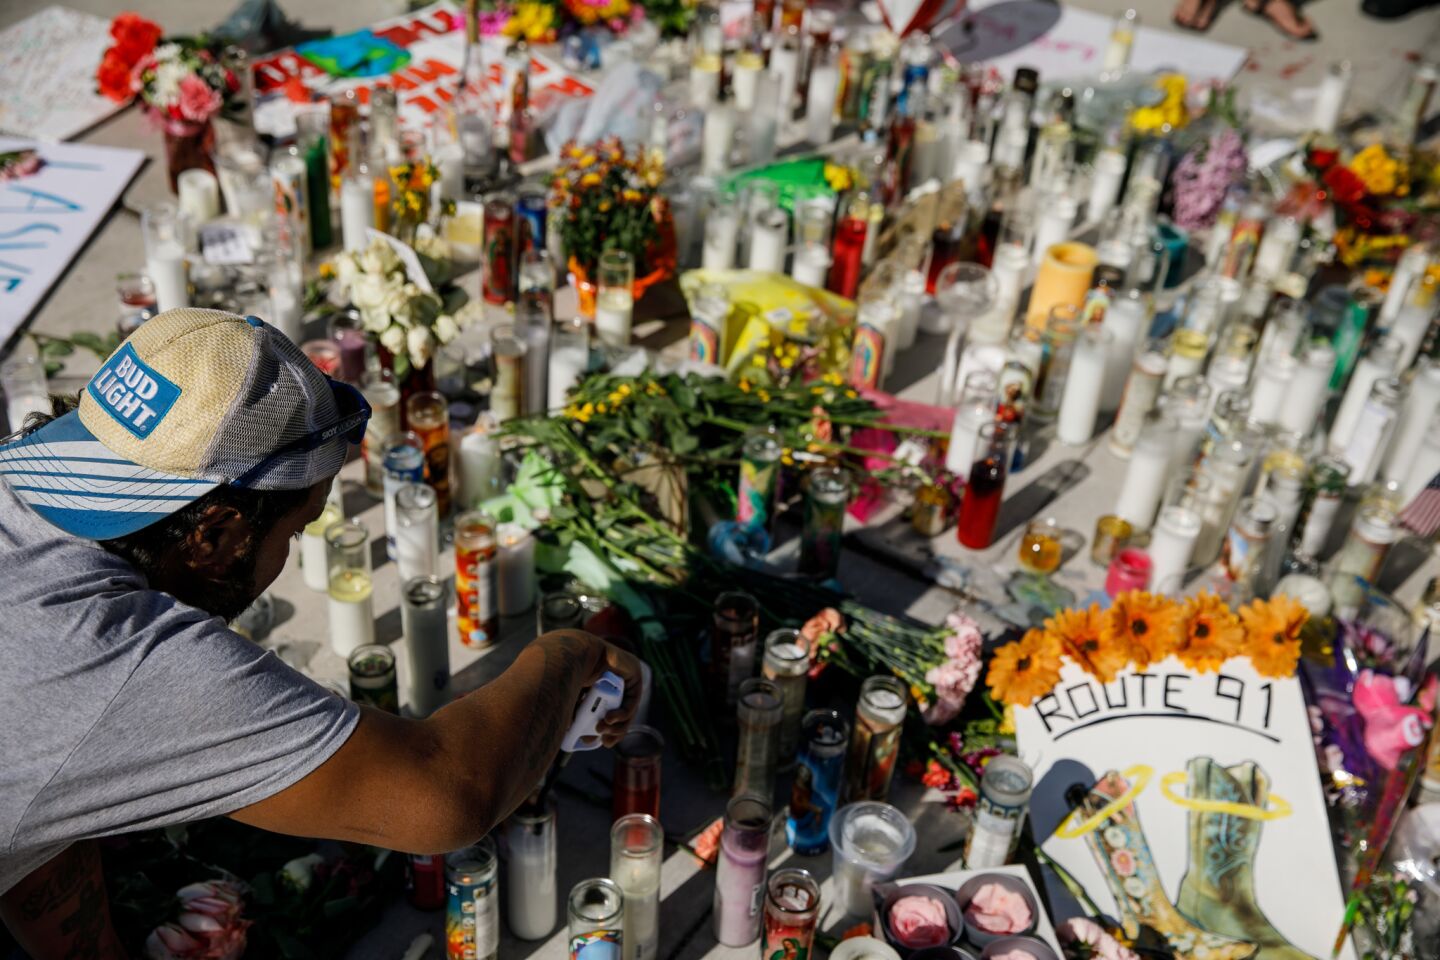 Matthew Edwards lights candles at a makeshift memorial at Sahara Avenue and Las Vegas Boulevard in Las Vegas for the victims of the mass shooting.